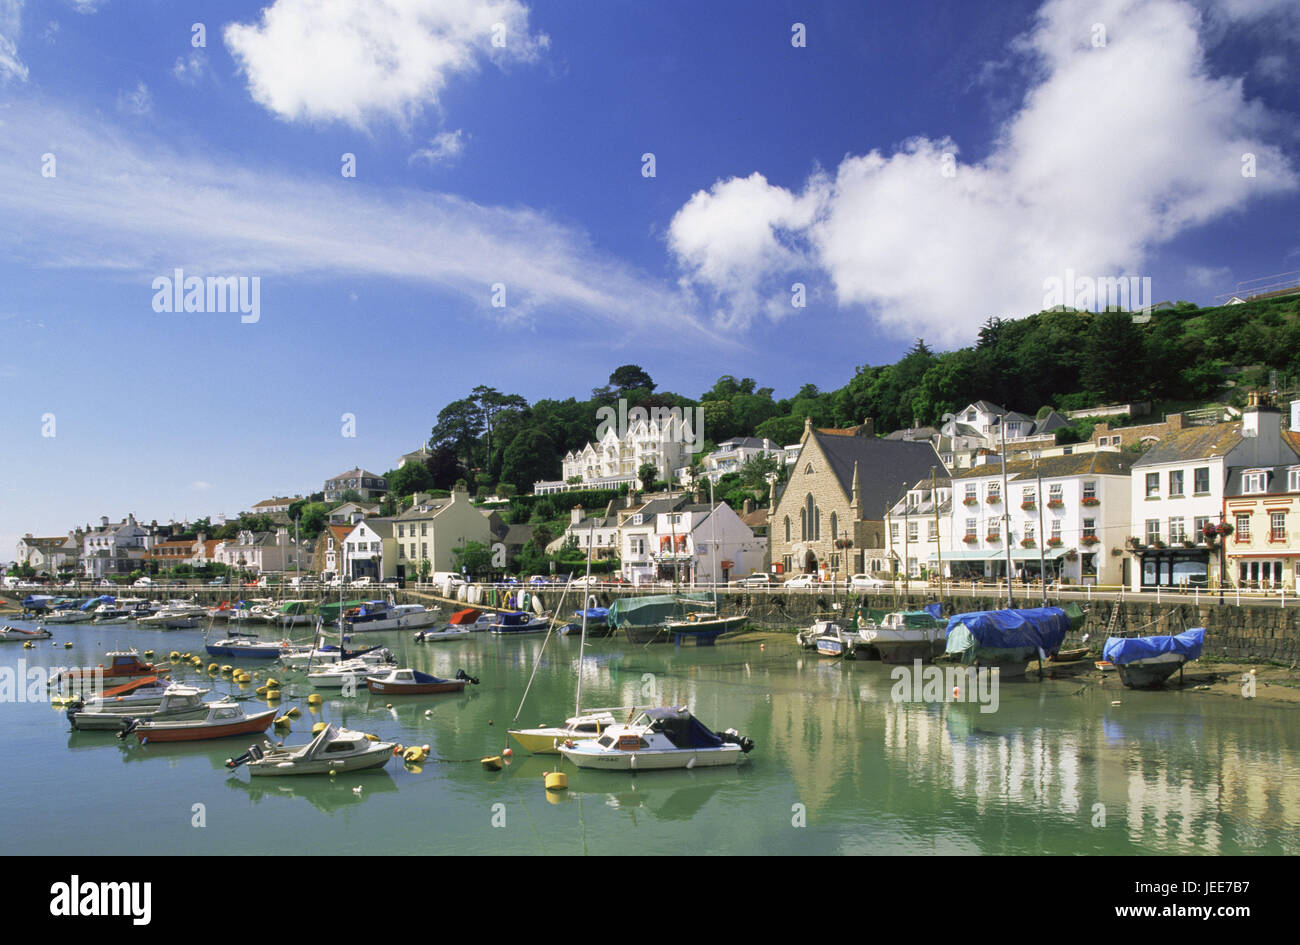 St Aubins Harbour High Resolution Stock Photography and Images - Alamy